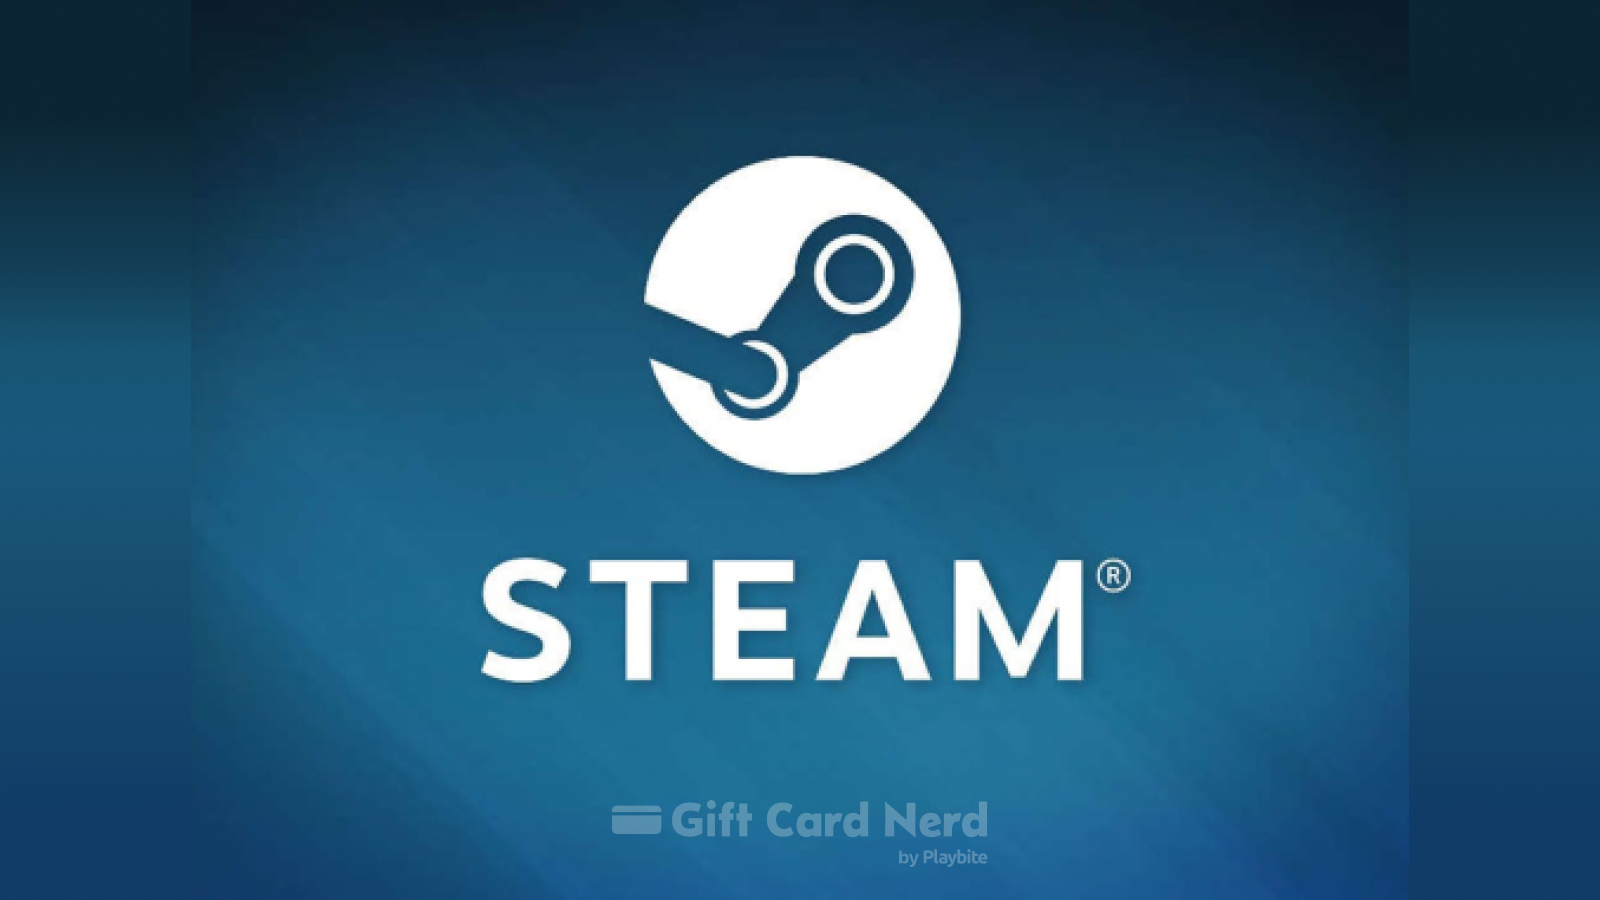 Does Target Sell Steam Gift Cards?